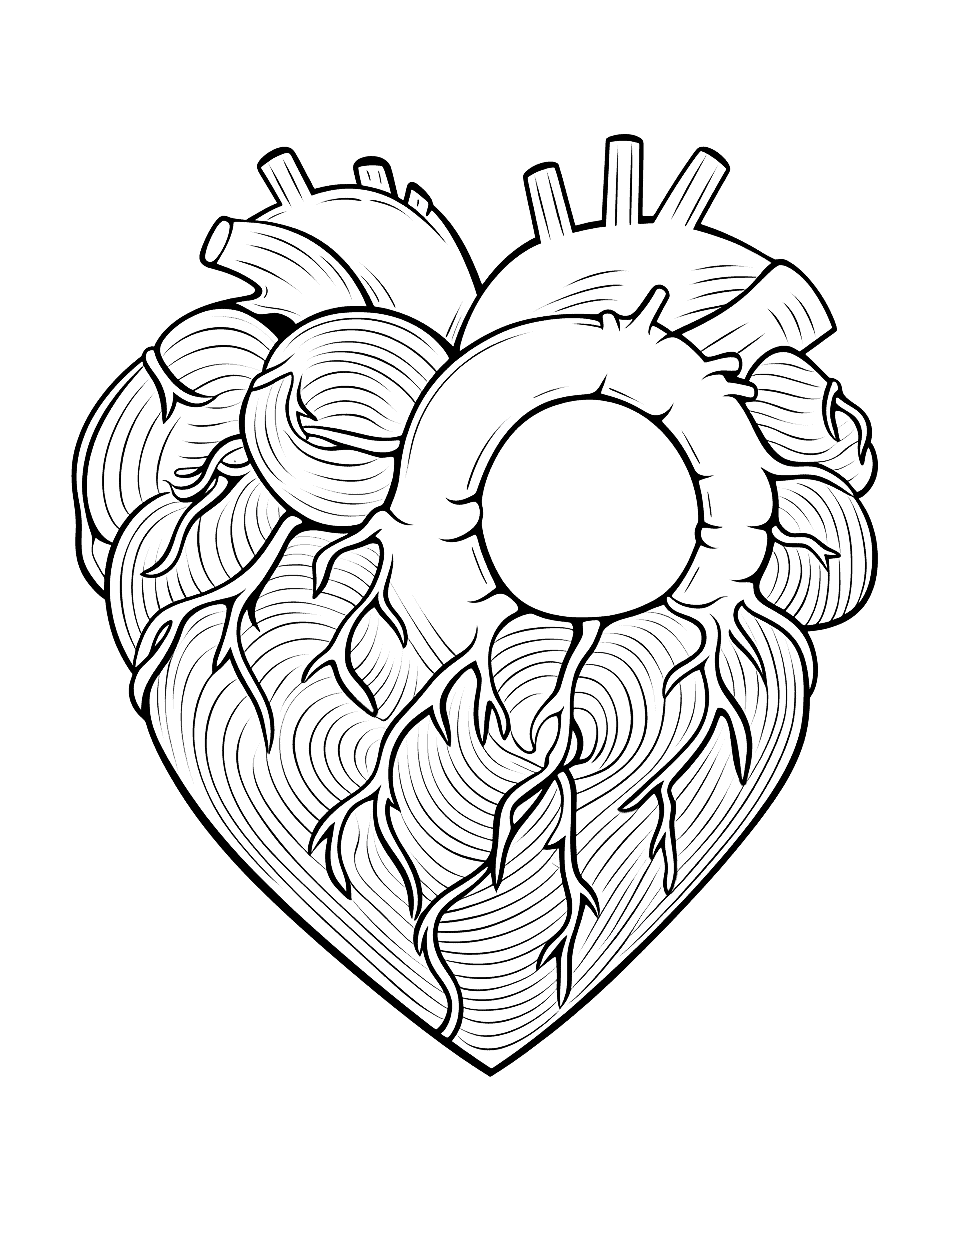 Detailed Realistic Heart Coloring Page - A detailed depiction of the human heart with vessels and veins.